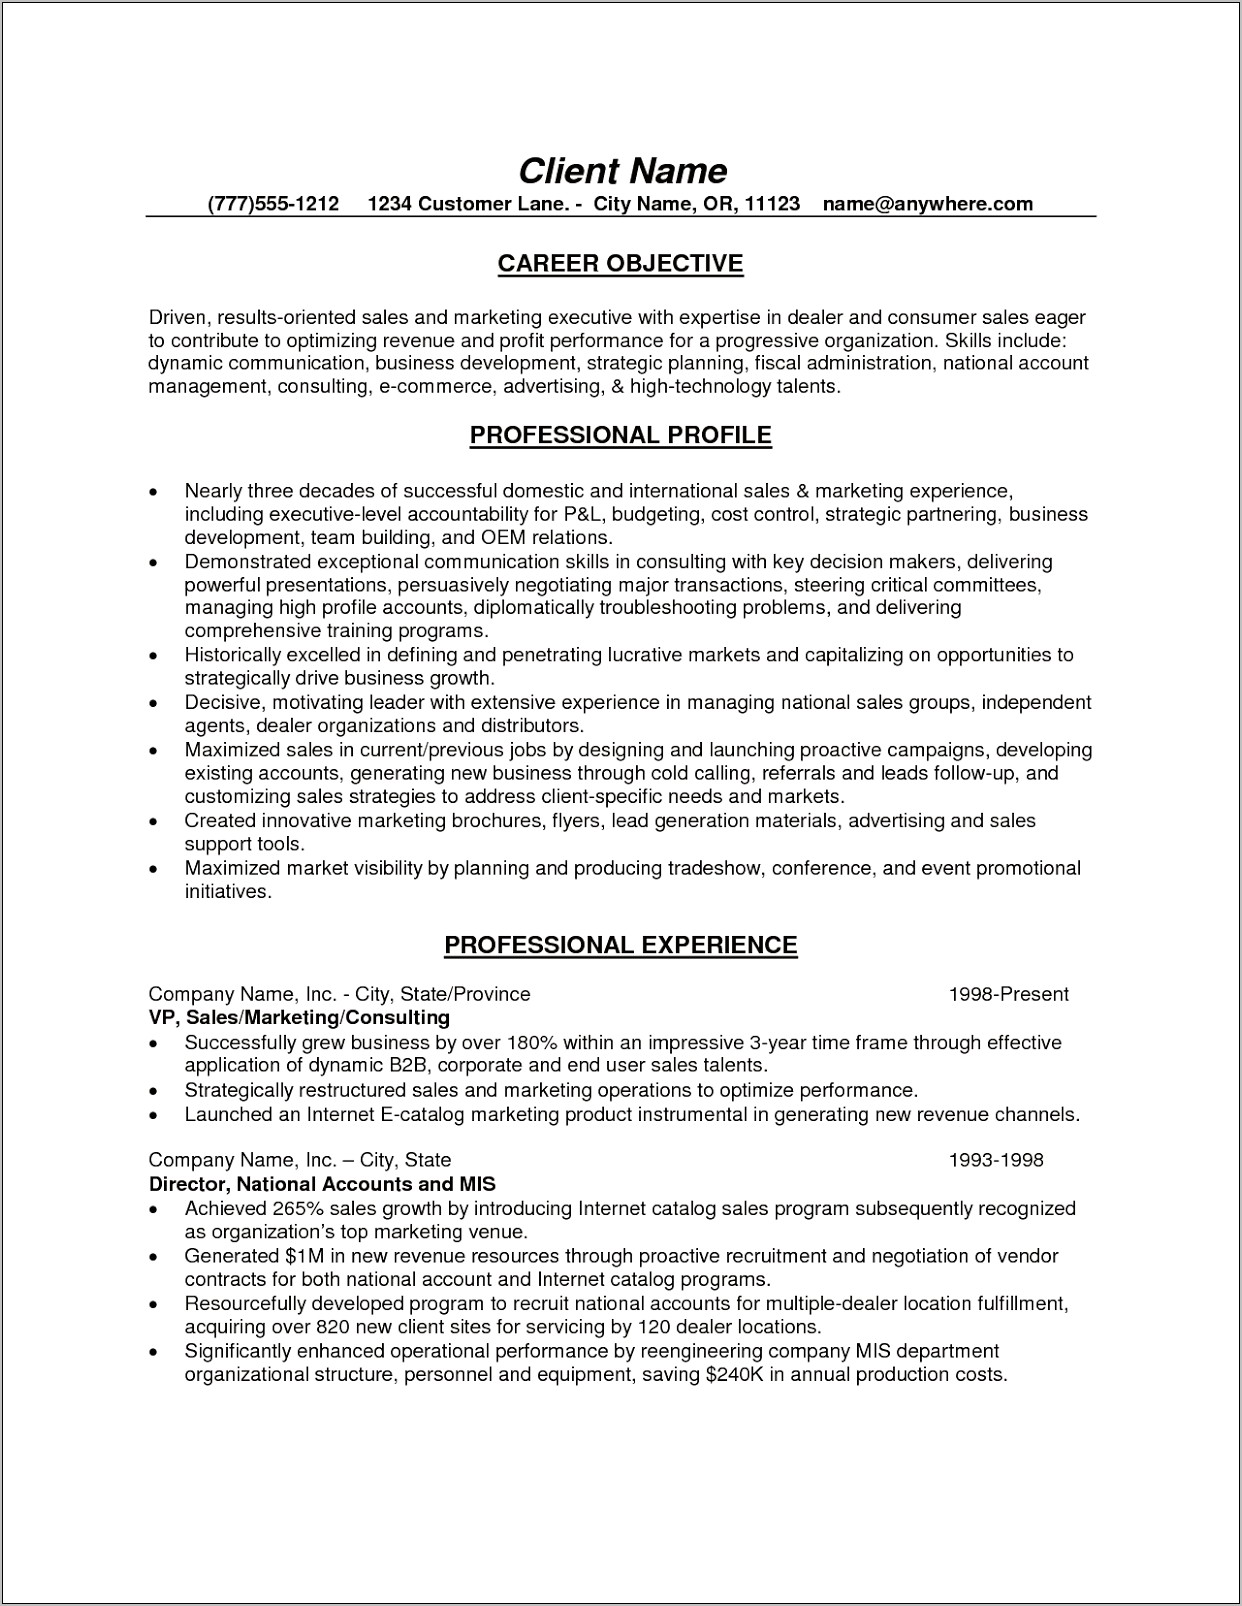 Objective Ideas In A Resume